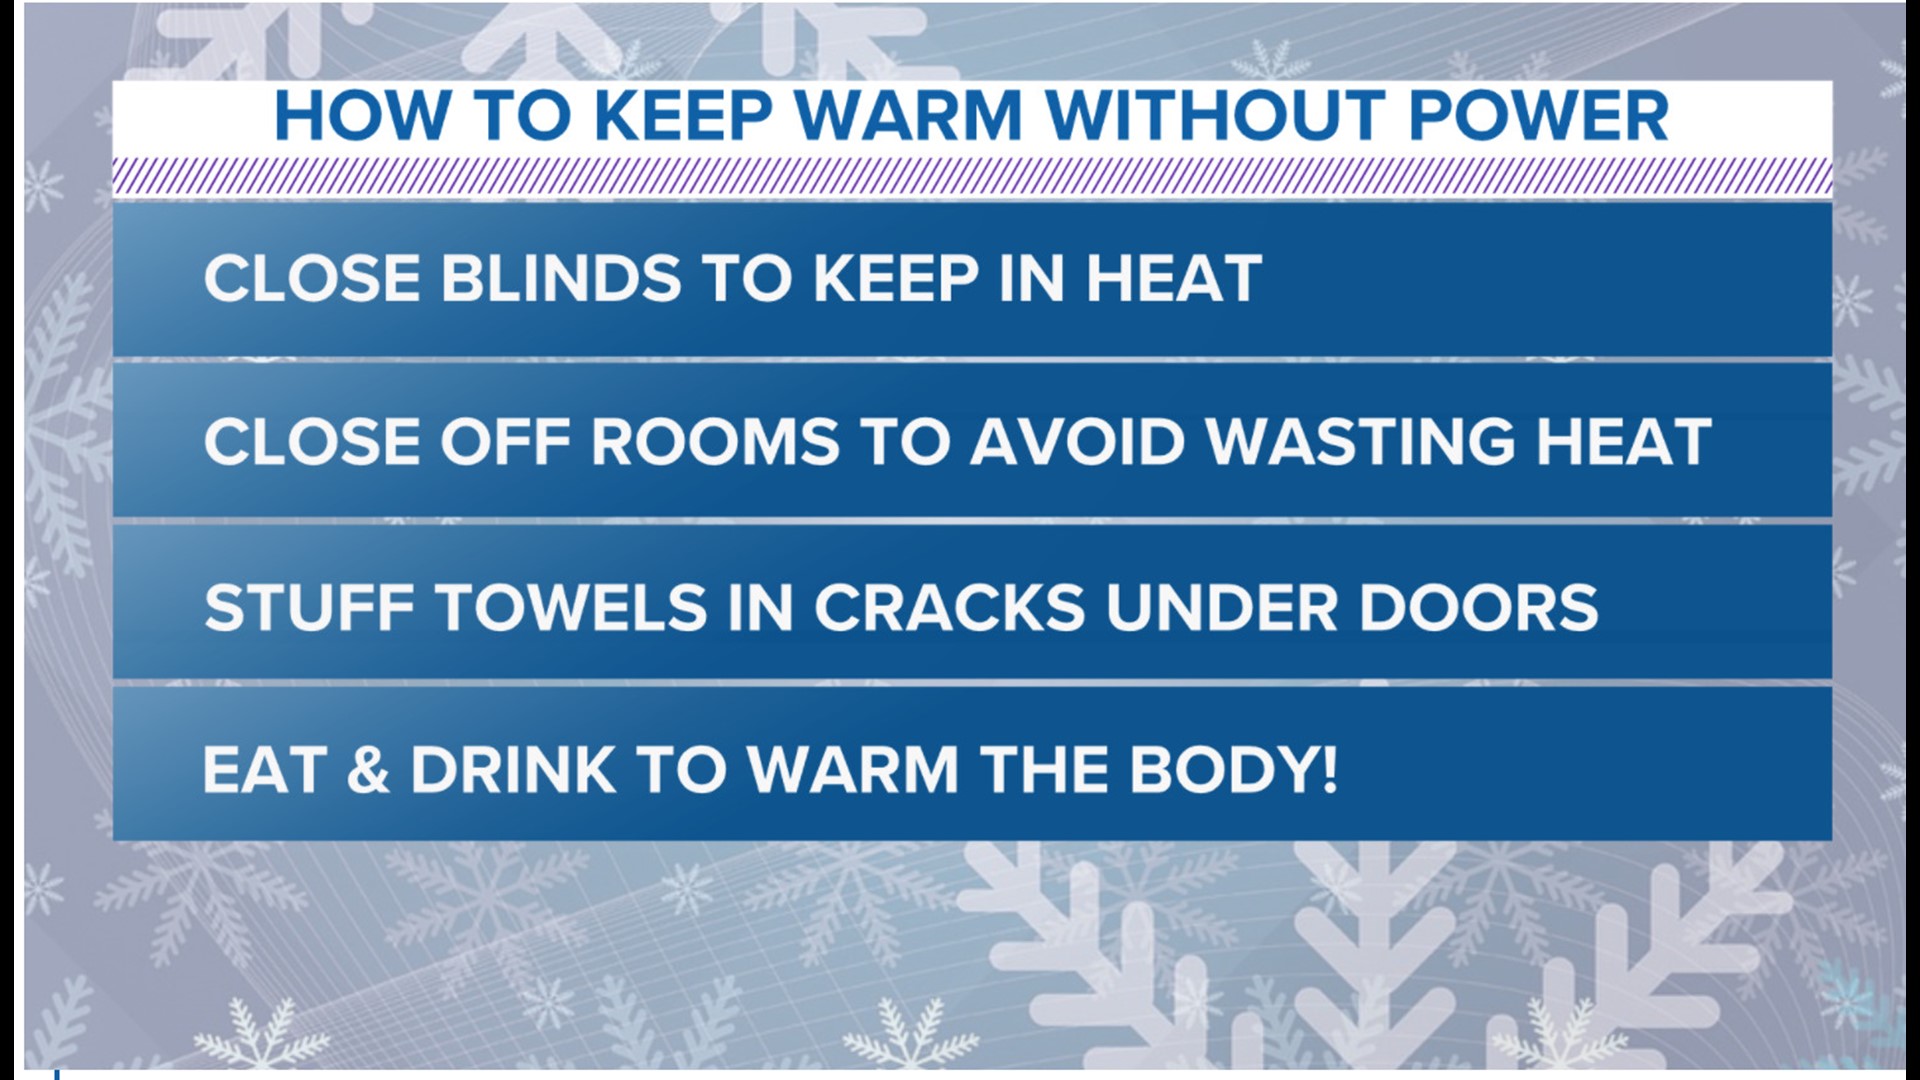 The National Weather Service has advice for keeping warm even without power